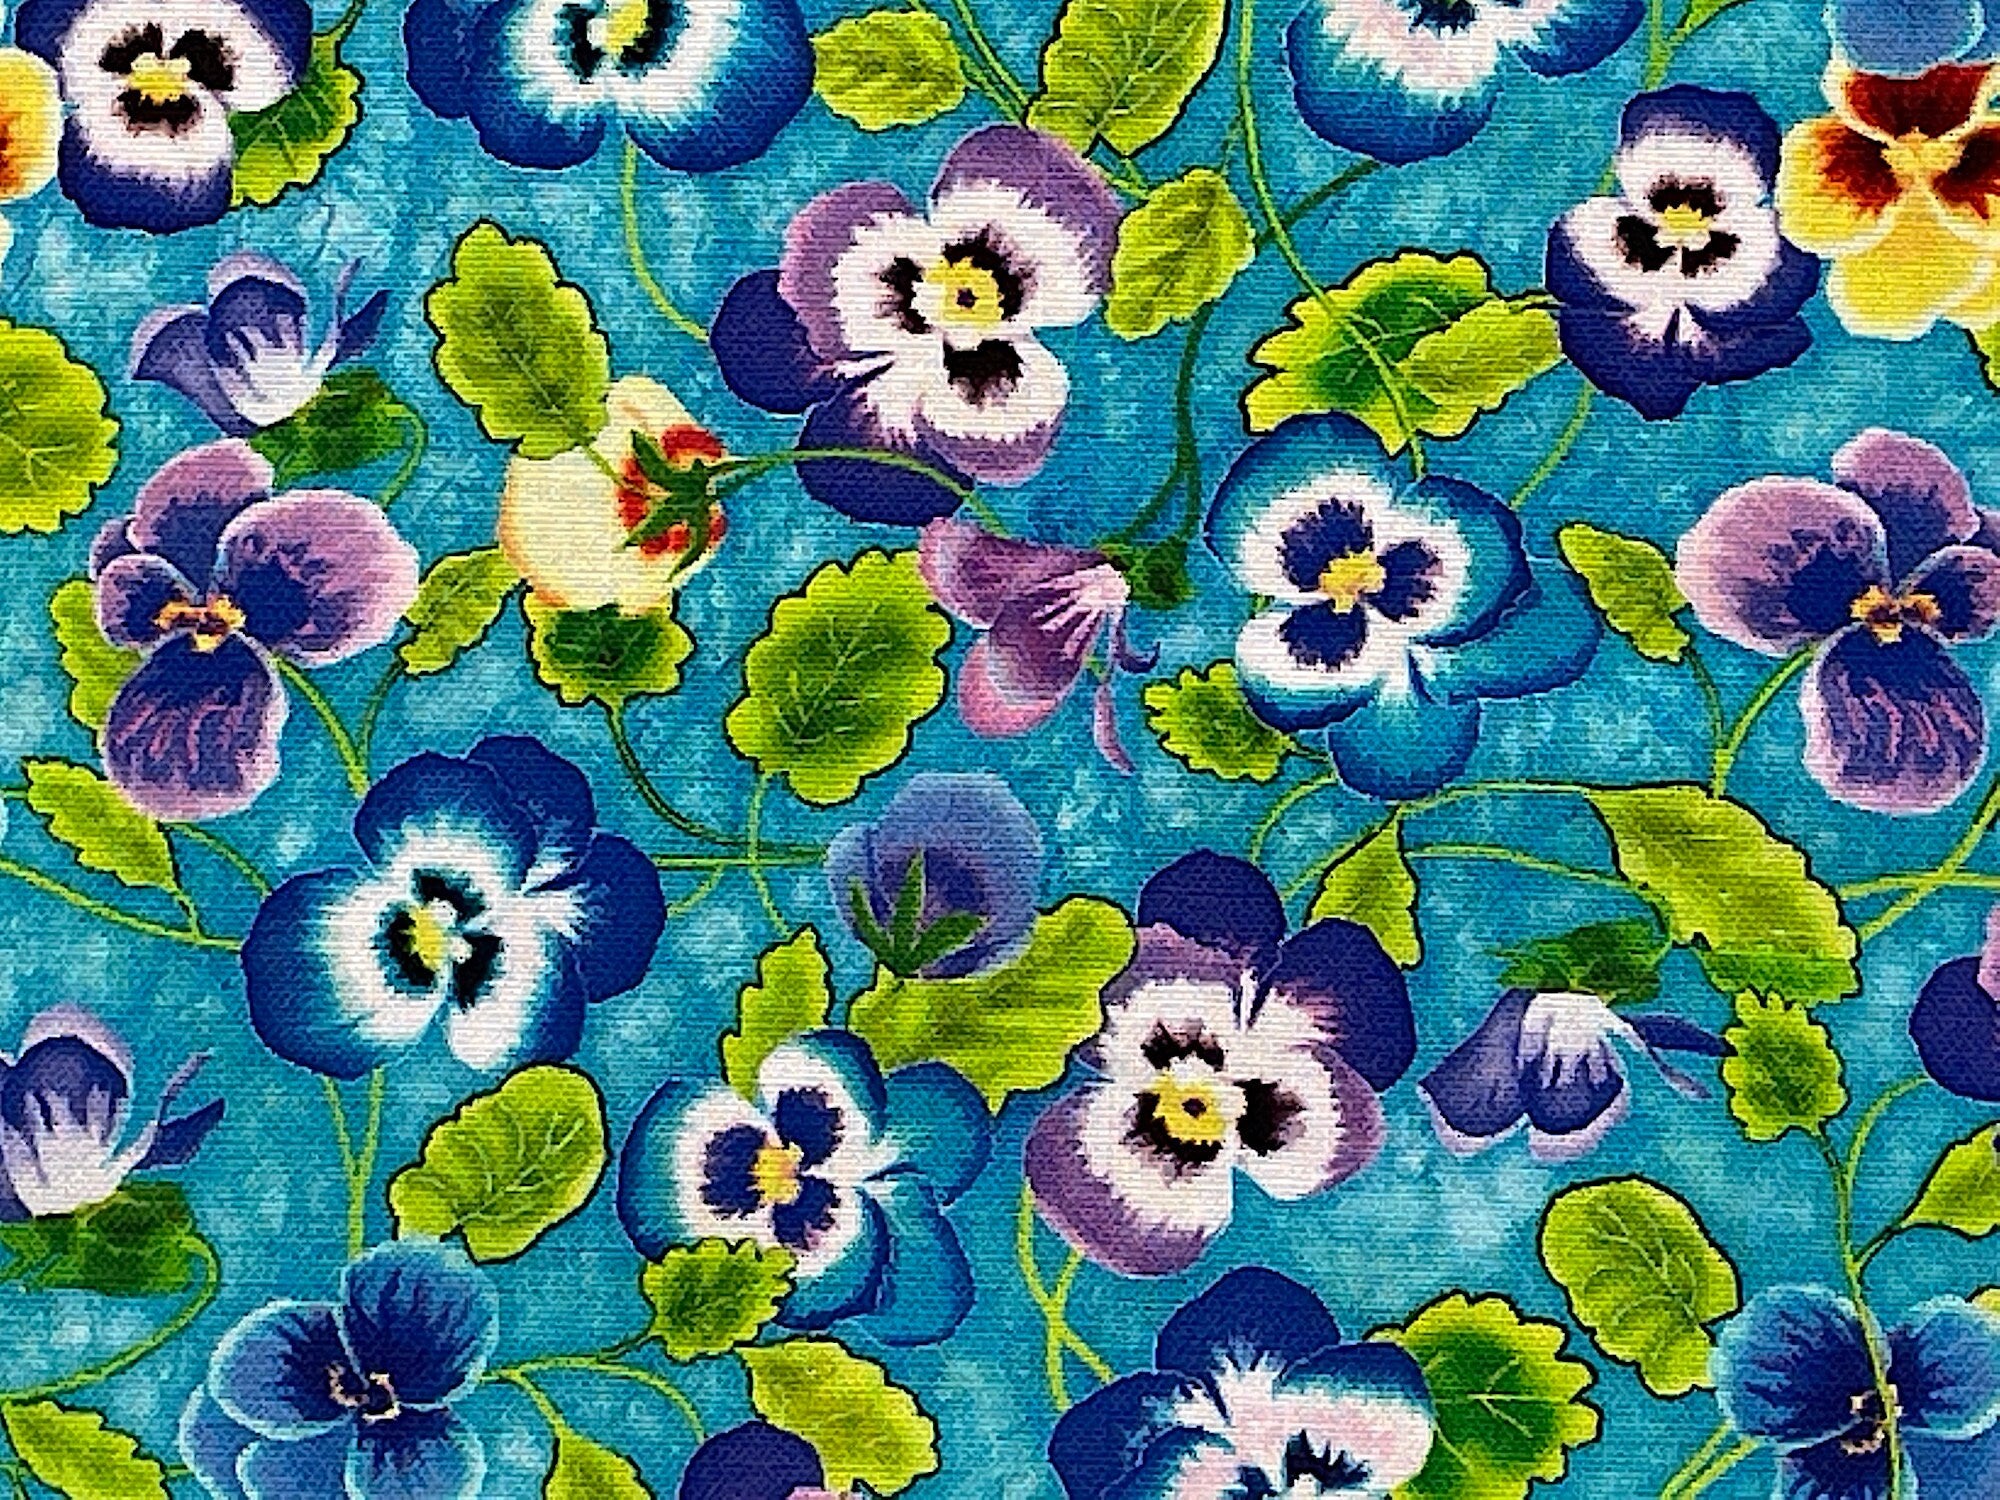 Close up of teal fabric covered with yellow, blue and purple pansies and green leaves.